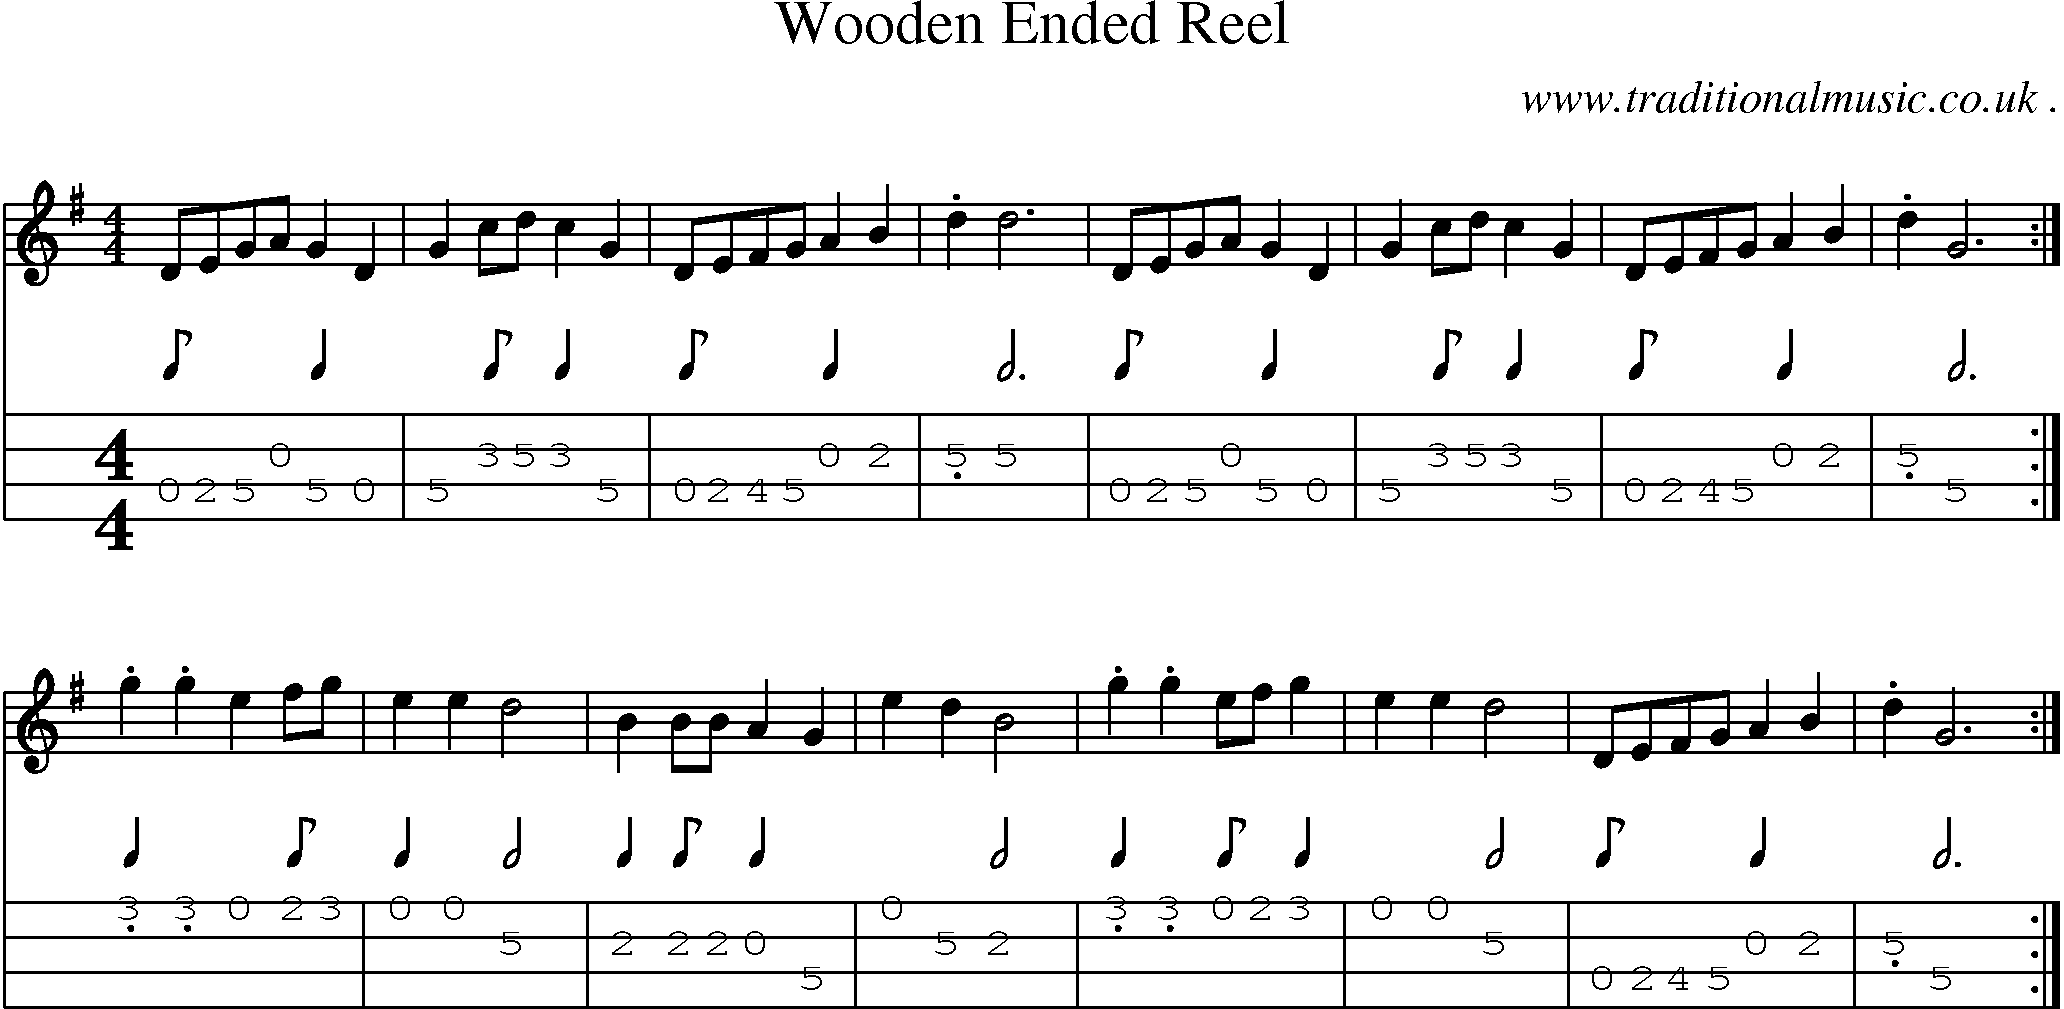 Music Score and Mandolin Tabs for Wooden Ended Reel